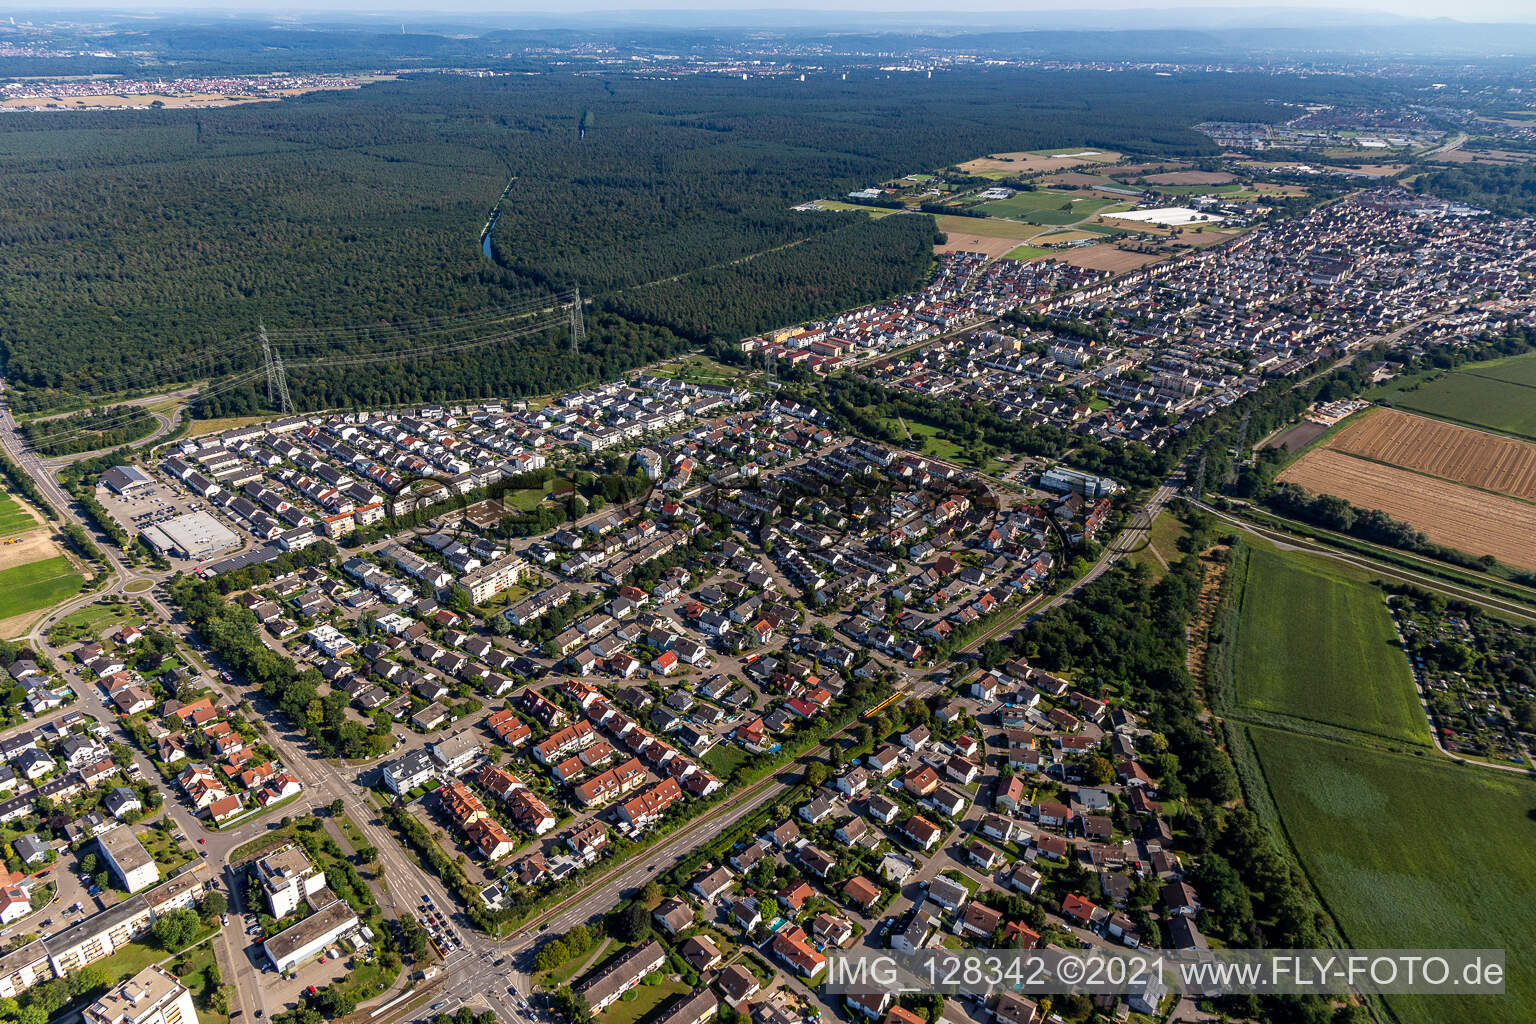 District Leopoldshafen in Eggenstein-Leopoldshafen in the state Baden-Wuerttemberg, Germany from the drone perspective